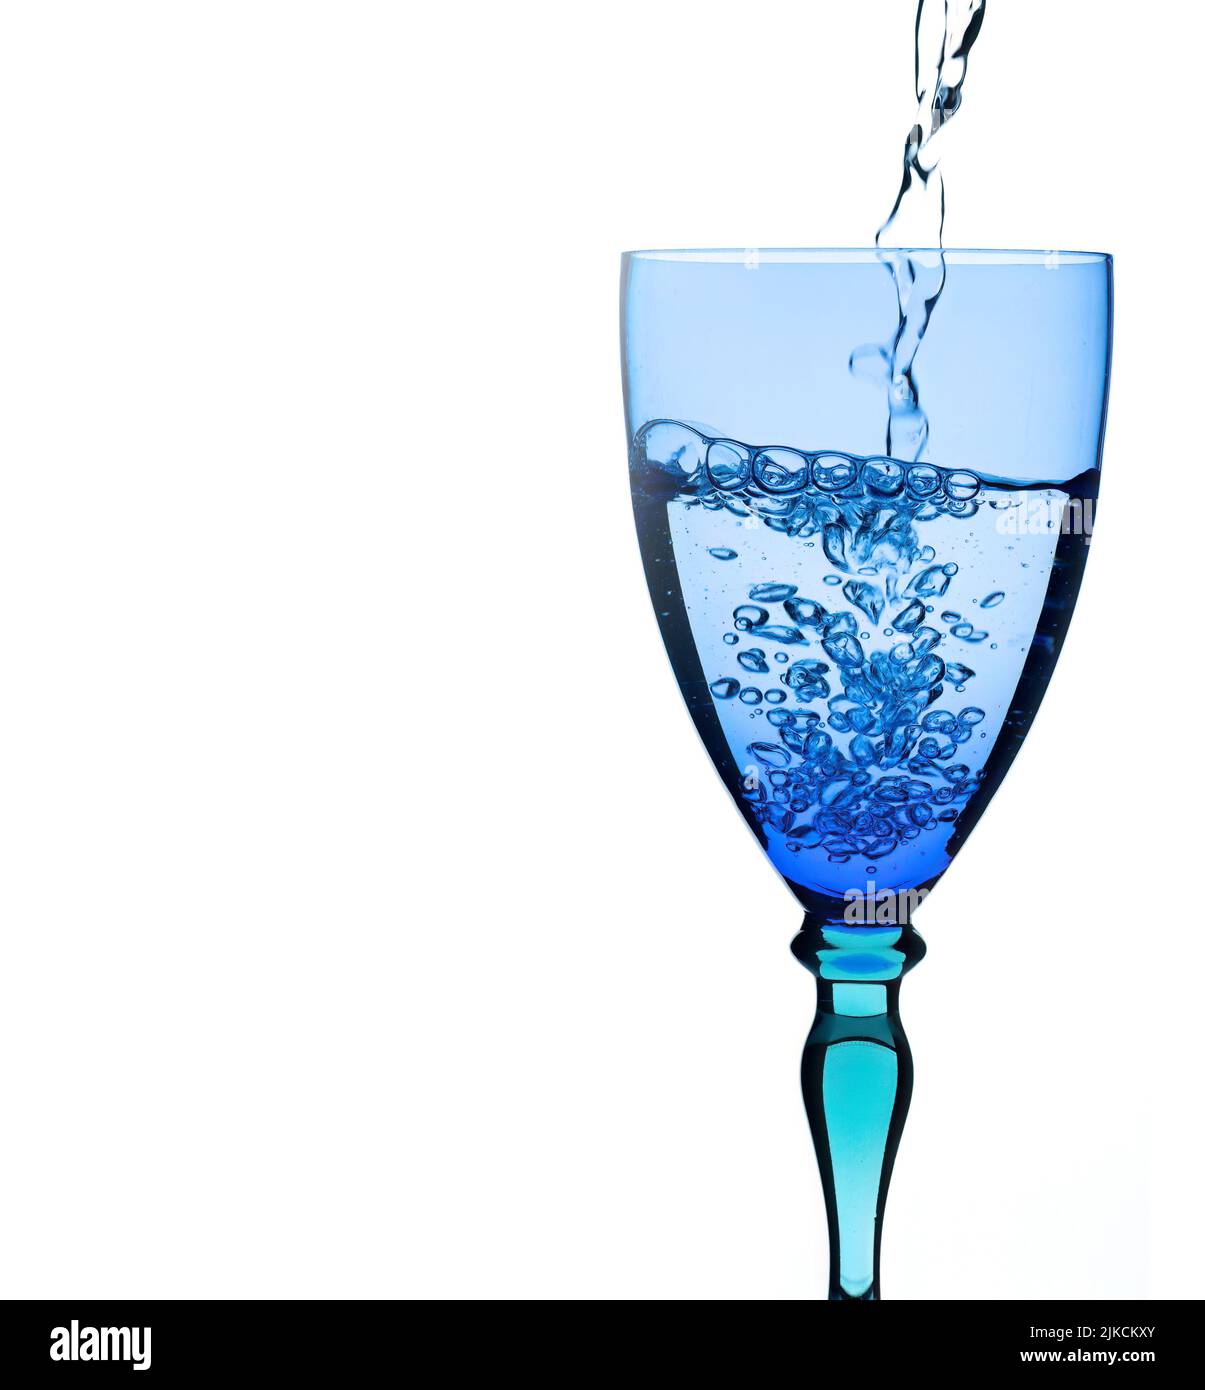 Water pouring into blue and turquoise glass, isolated on white background. Refreshment in the heat. No ice. Stock Photo